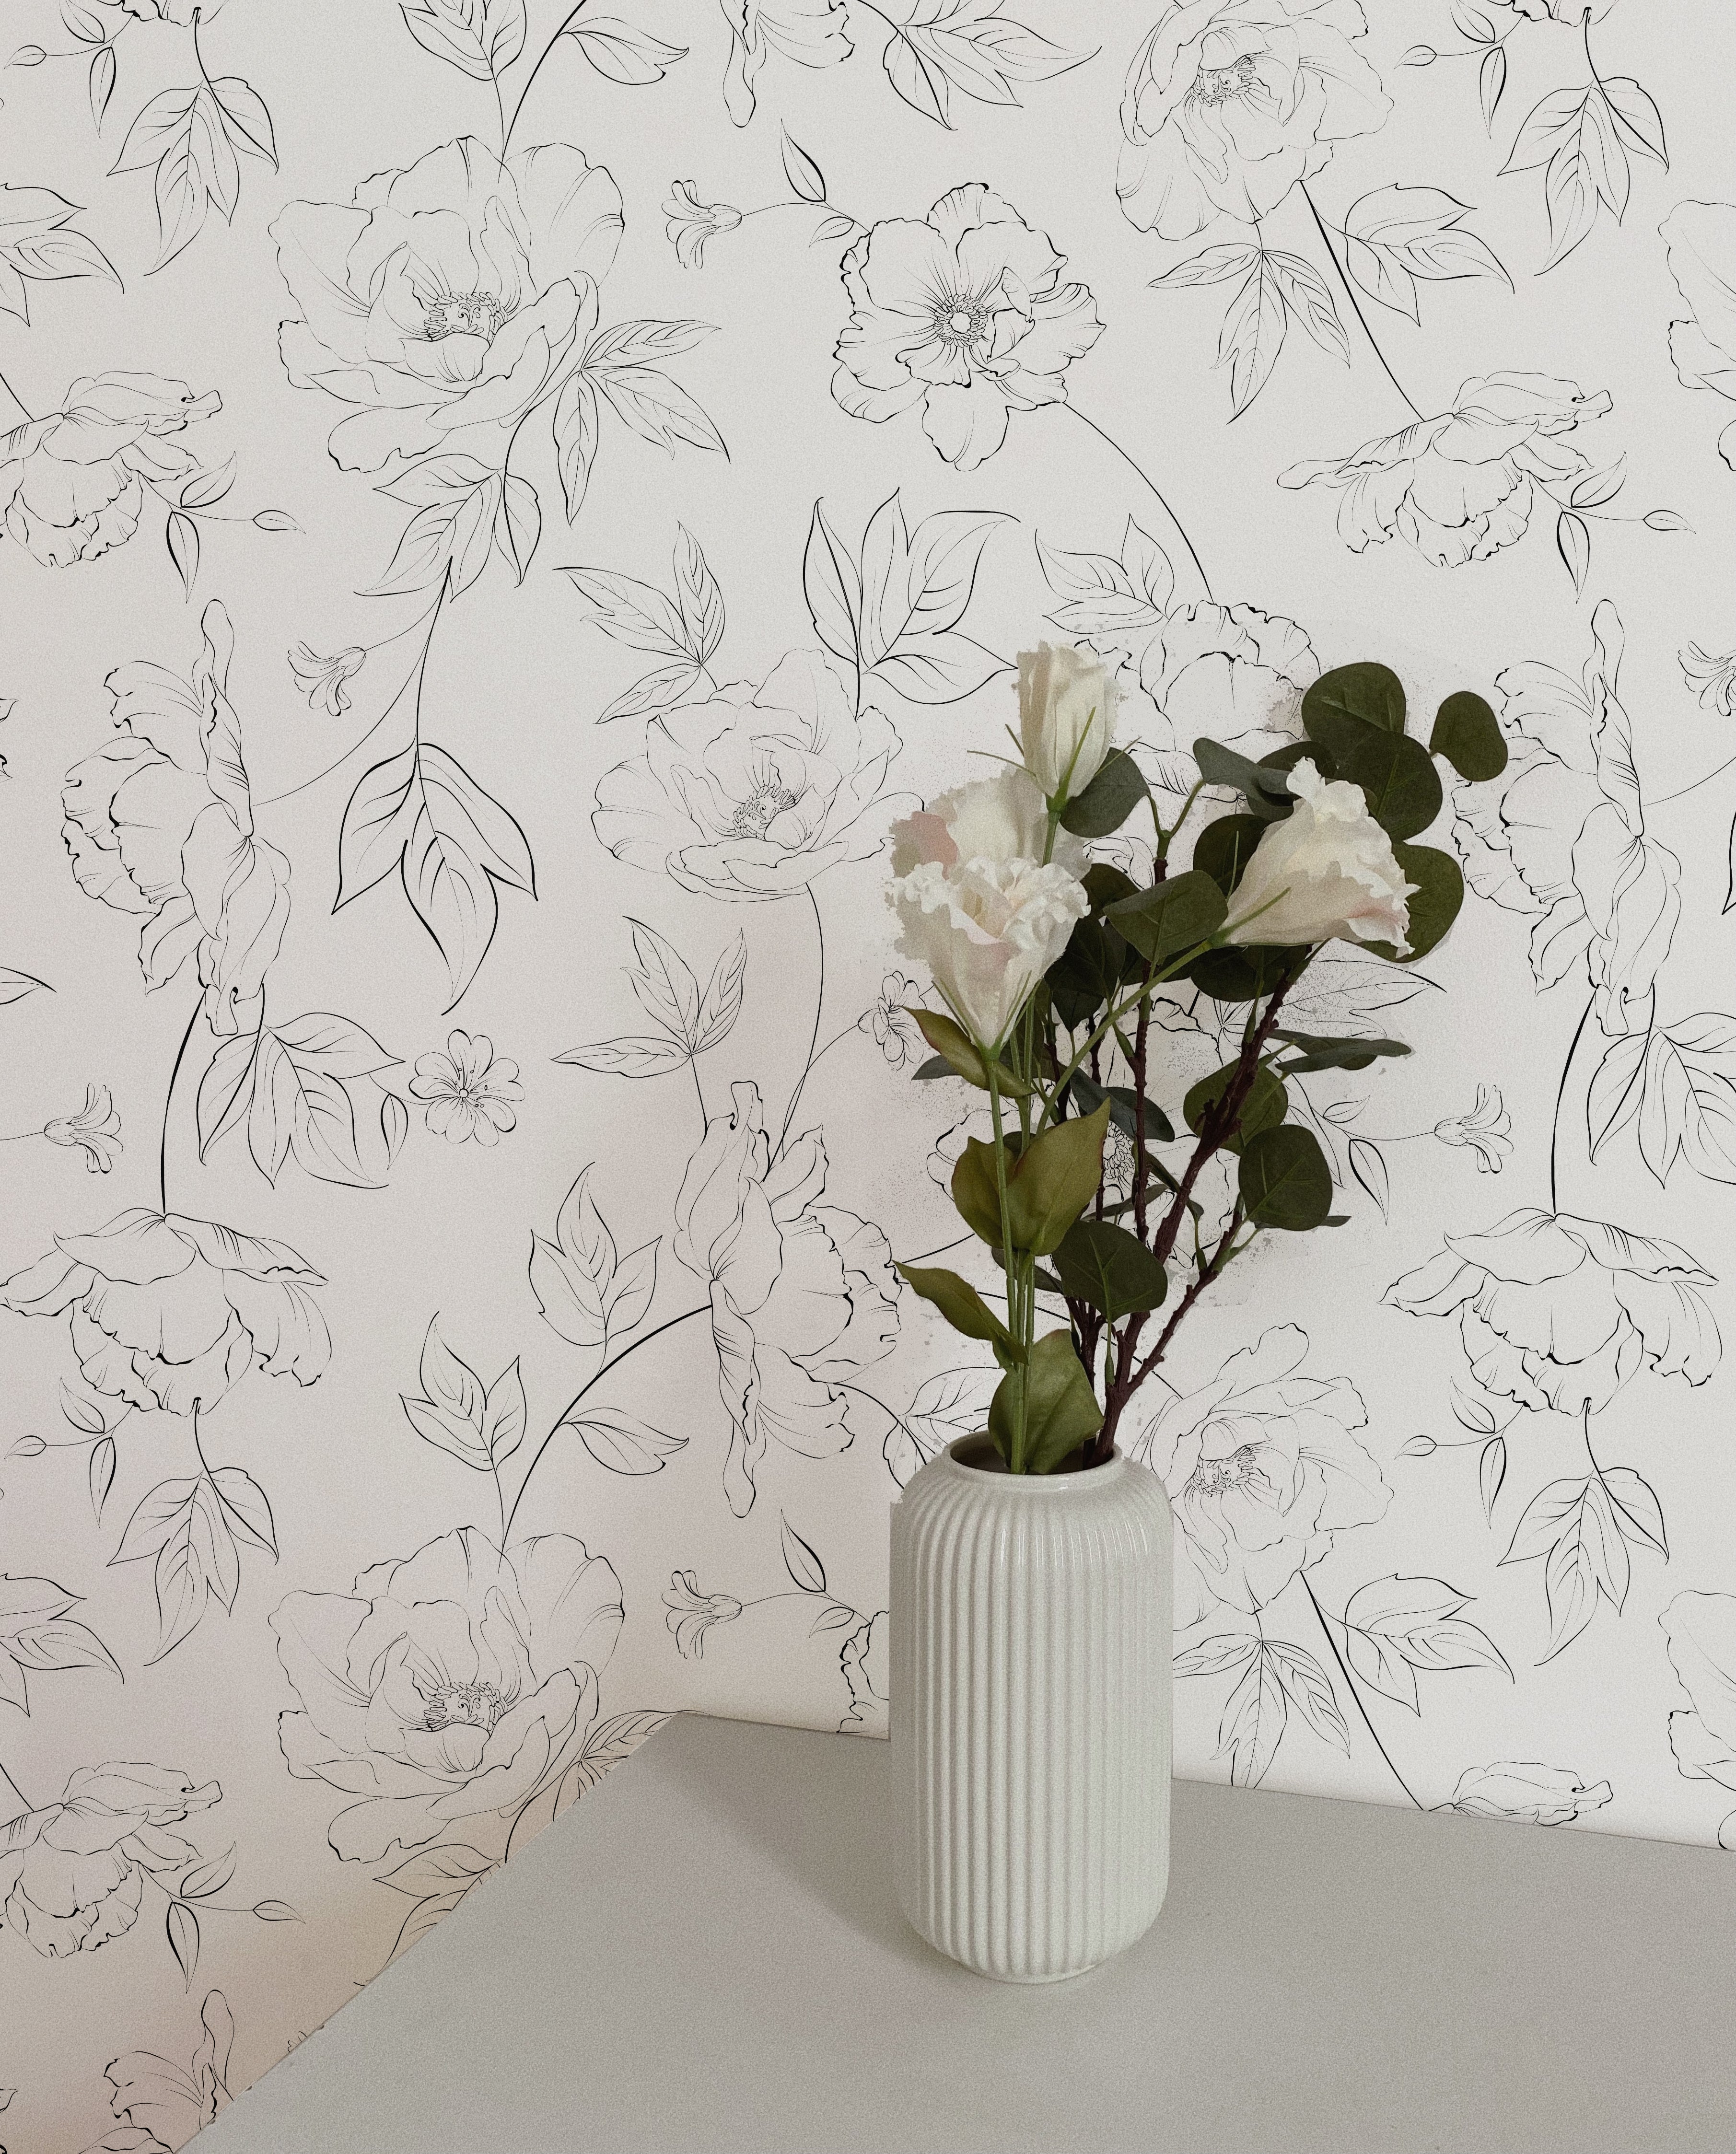 Elegant white vase with fresh flowers set against the Dainty Floral Line Wallpaper, emphasizing the detailed floral line art